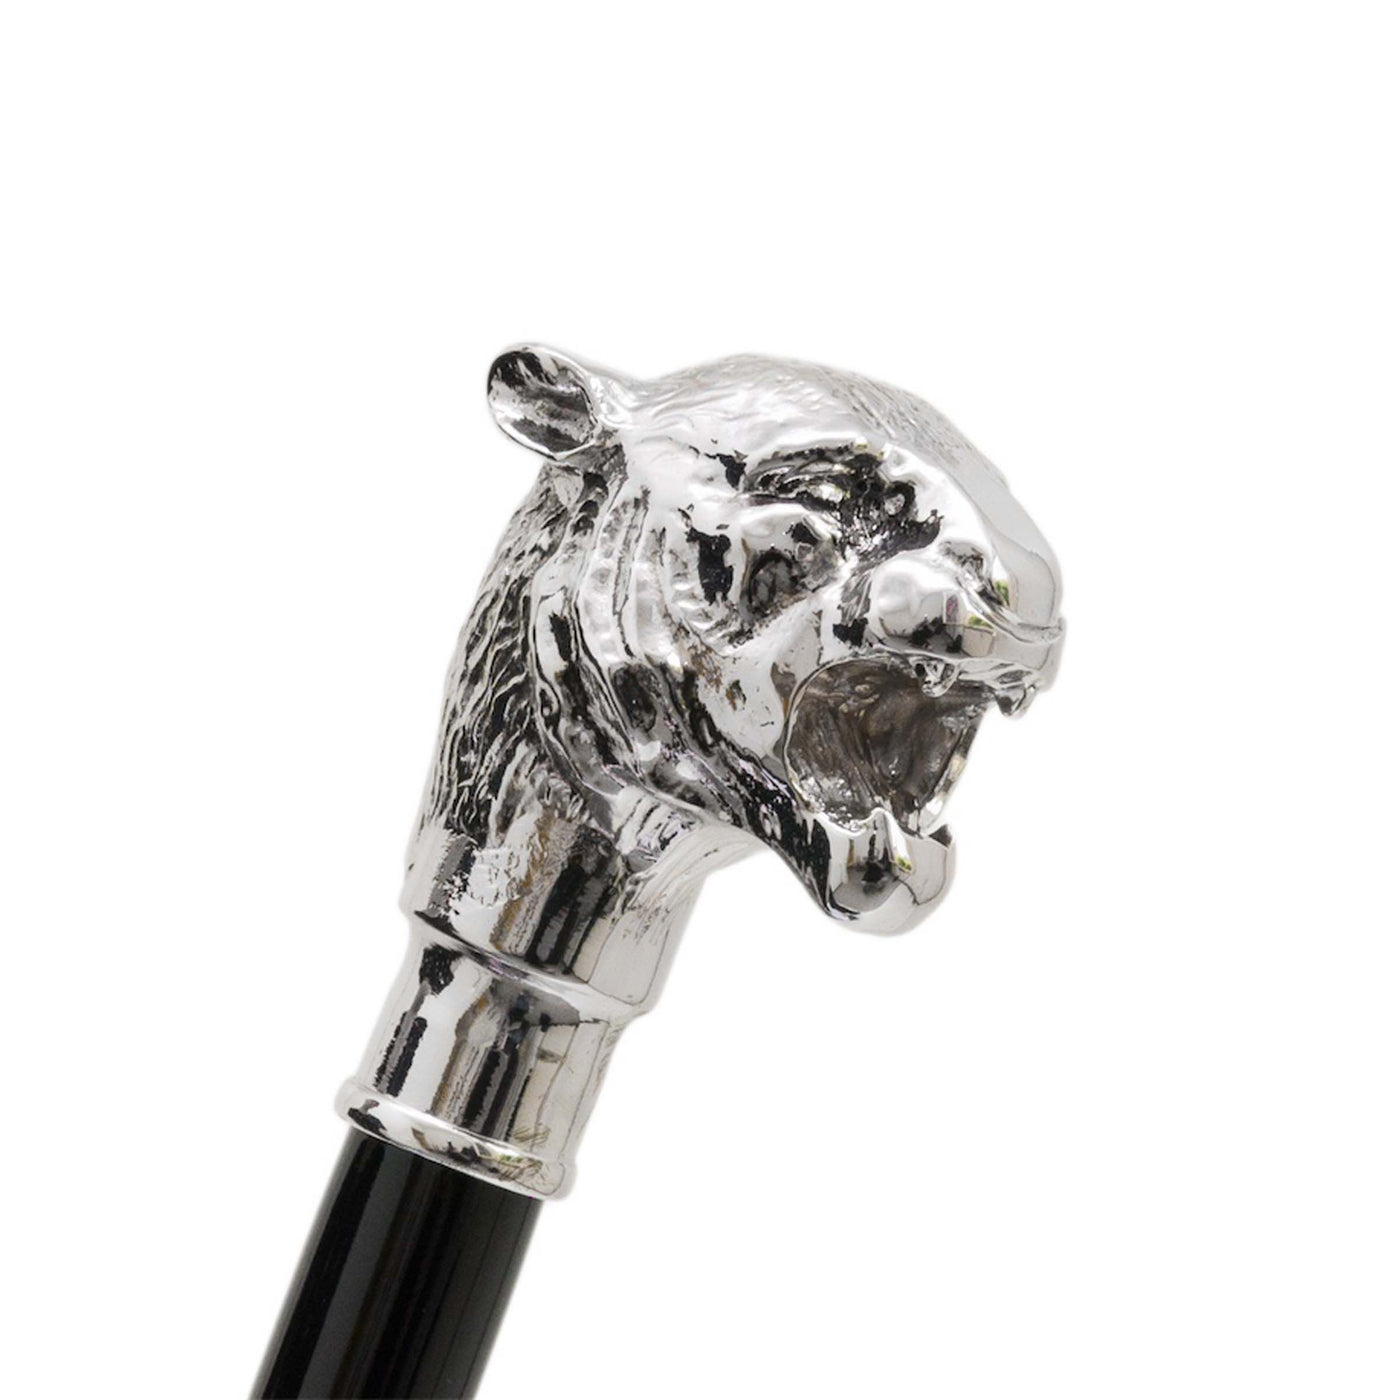 Cane TIGER with Silver-Plated Resin Handle 05